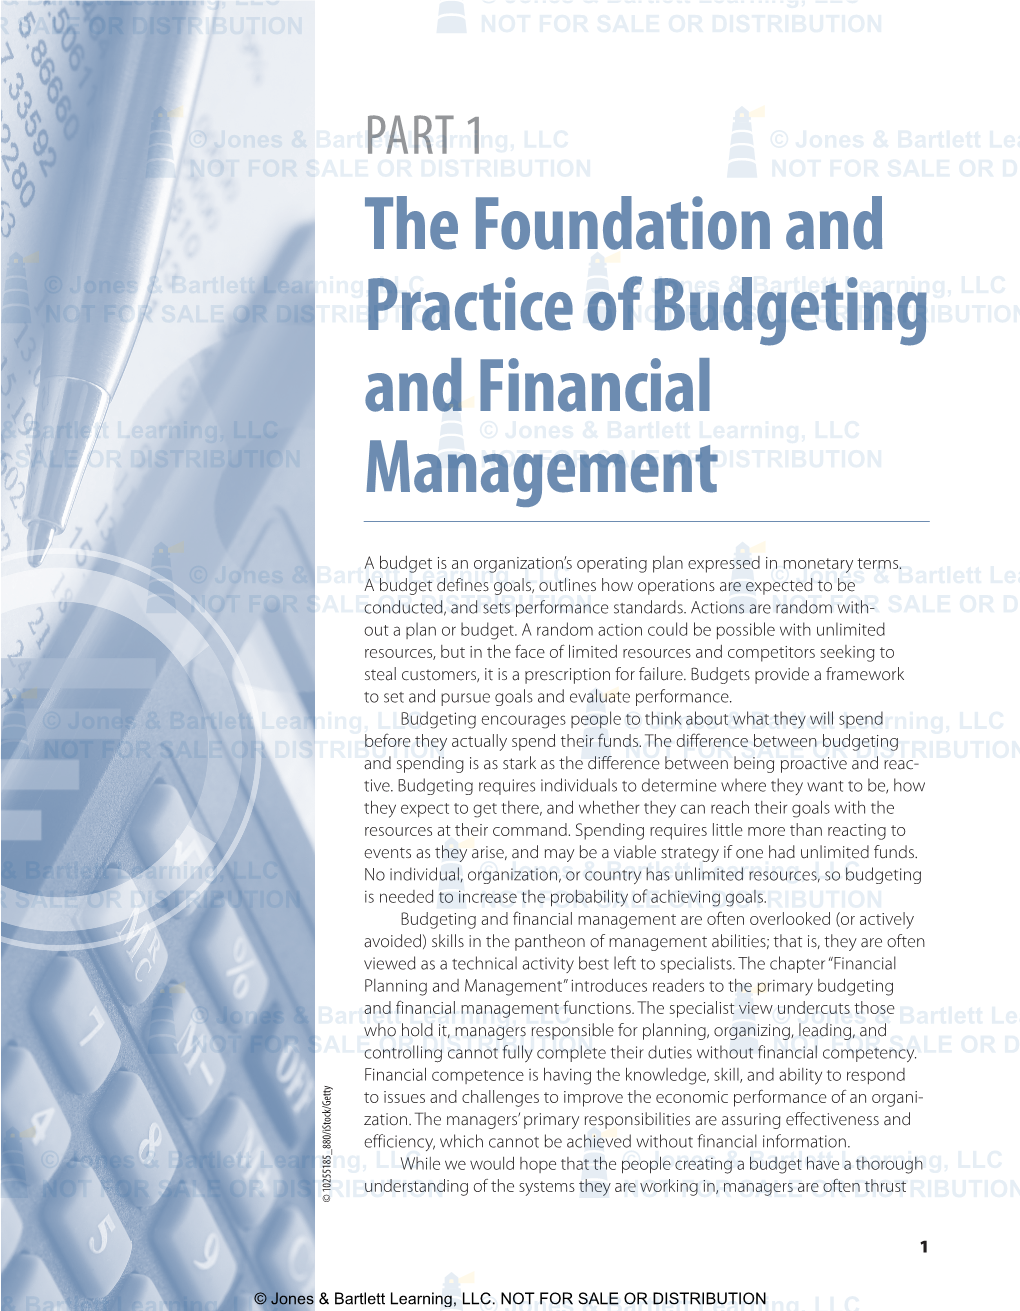 The Foundation and Practice of Budgeting and Financial Management